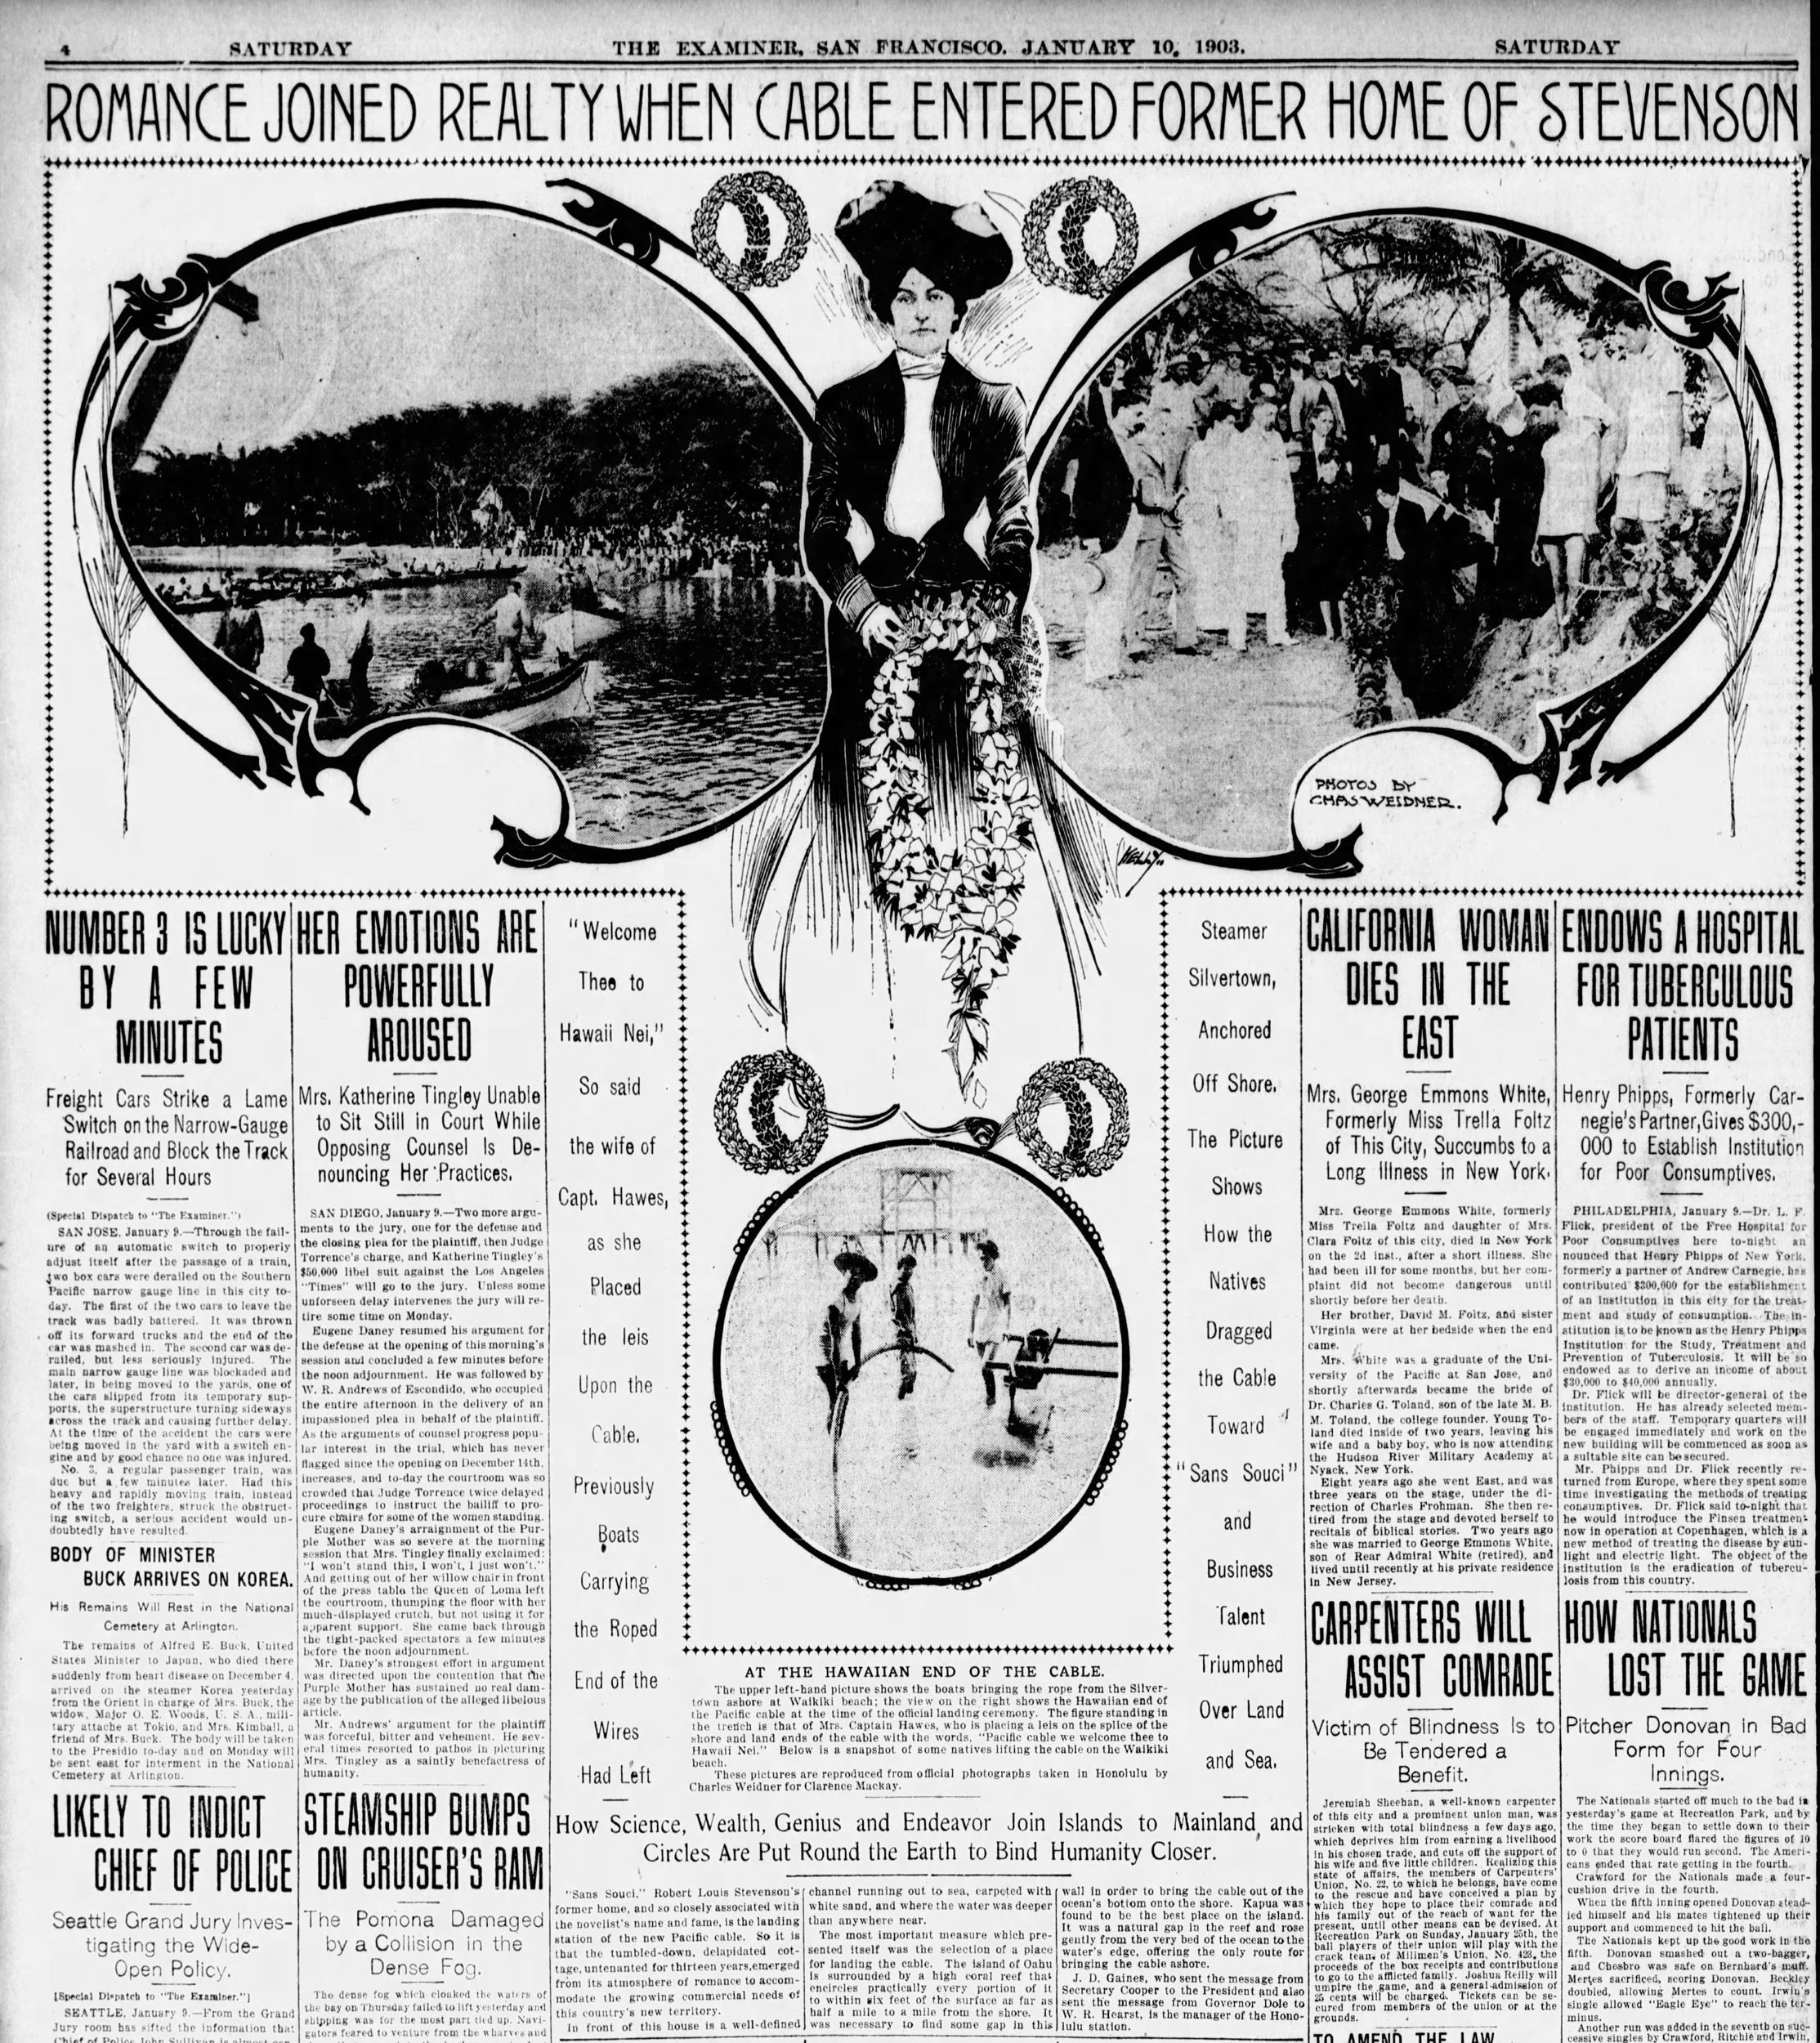 Newspaper page with illustration of a woman holding a flower wreath, flanked by two ovoid photographs of people at outdoor events. The masthead reads "Saturday / The Examiner, San Francisco, January 10, 1902 / Saturday" and the most prominent headline reads "Romance joined Realty when cable entered former home of Stevenson"